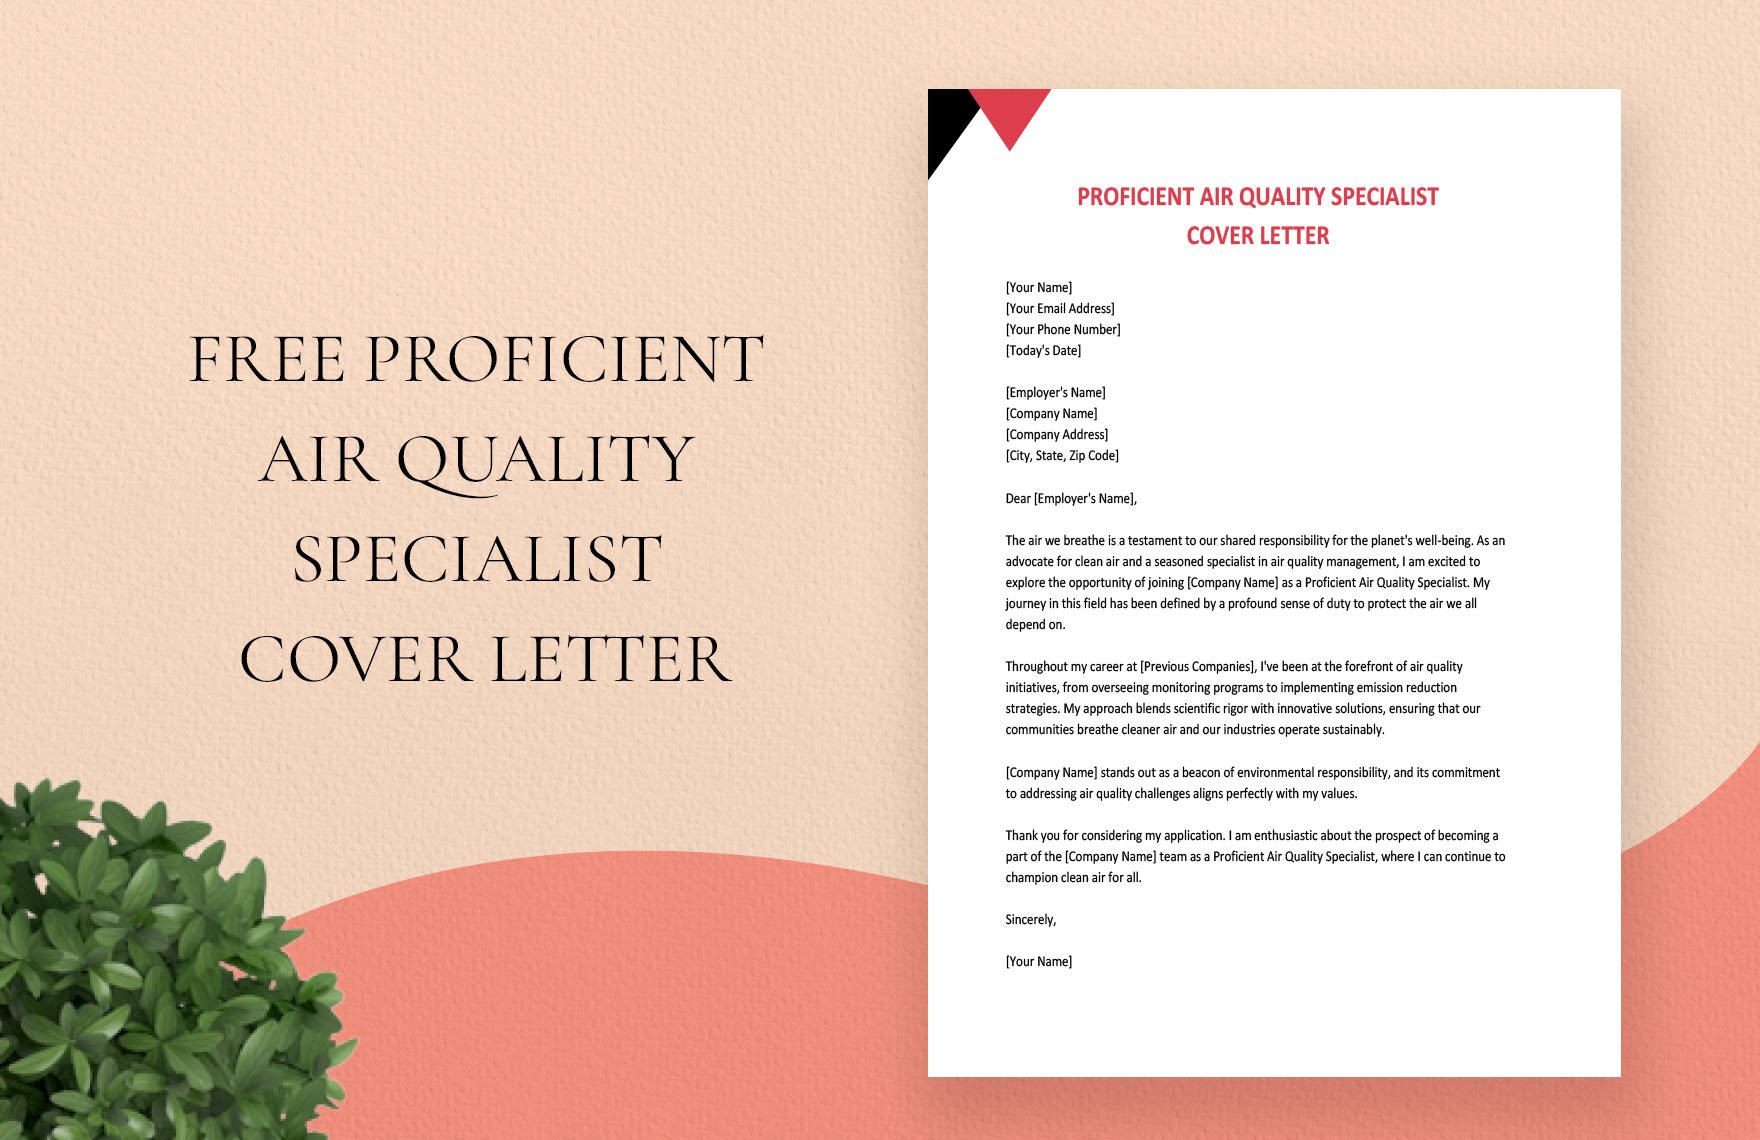 Proficient Air Quality Specialist Cover Letter